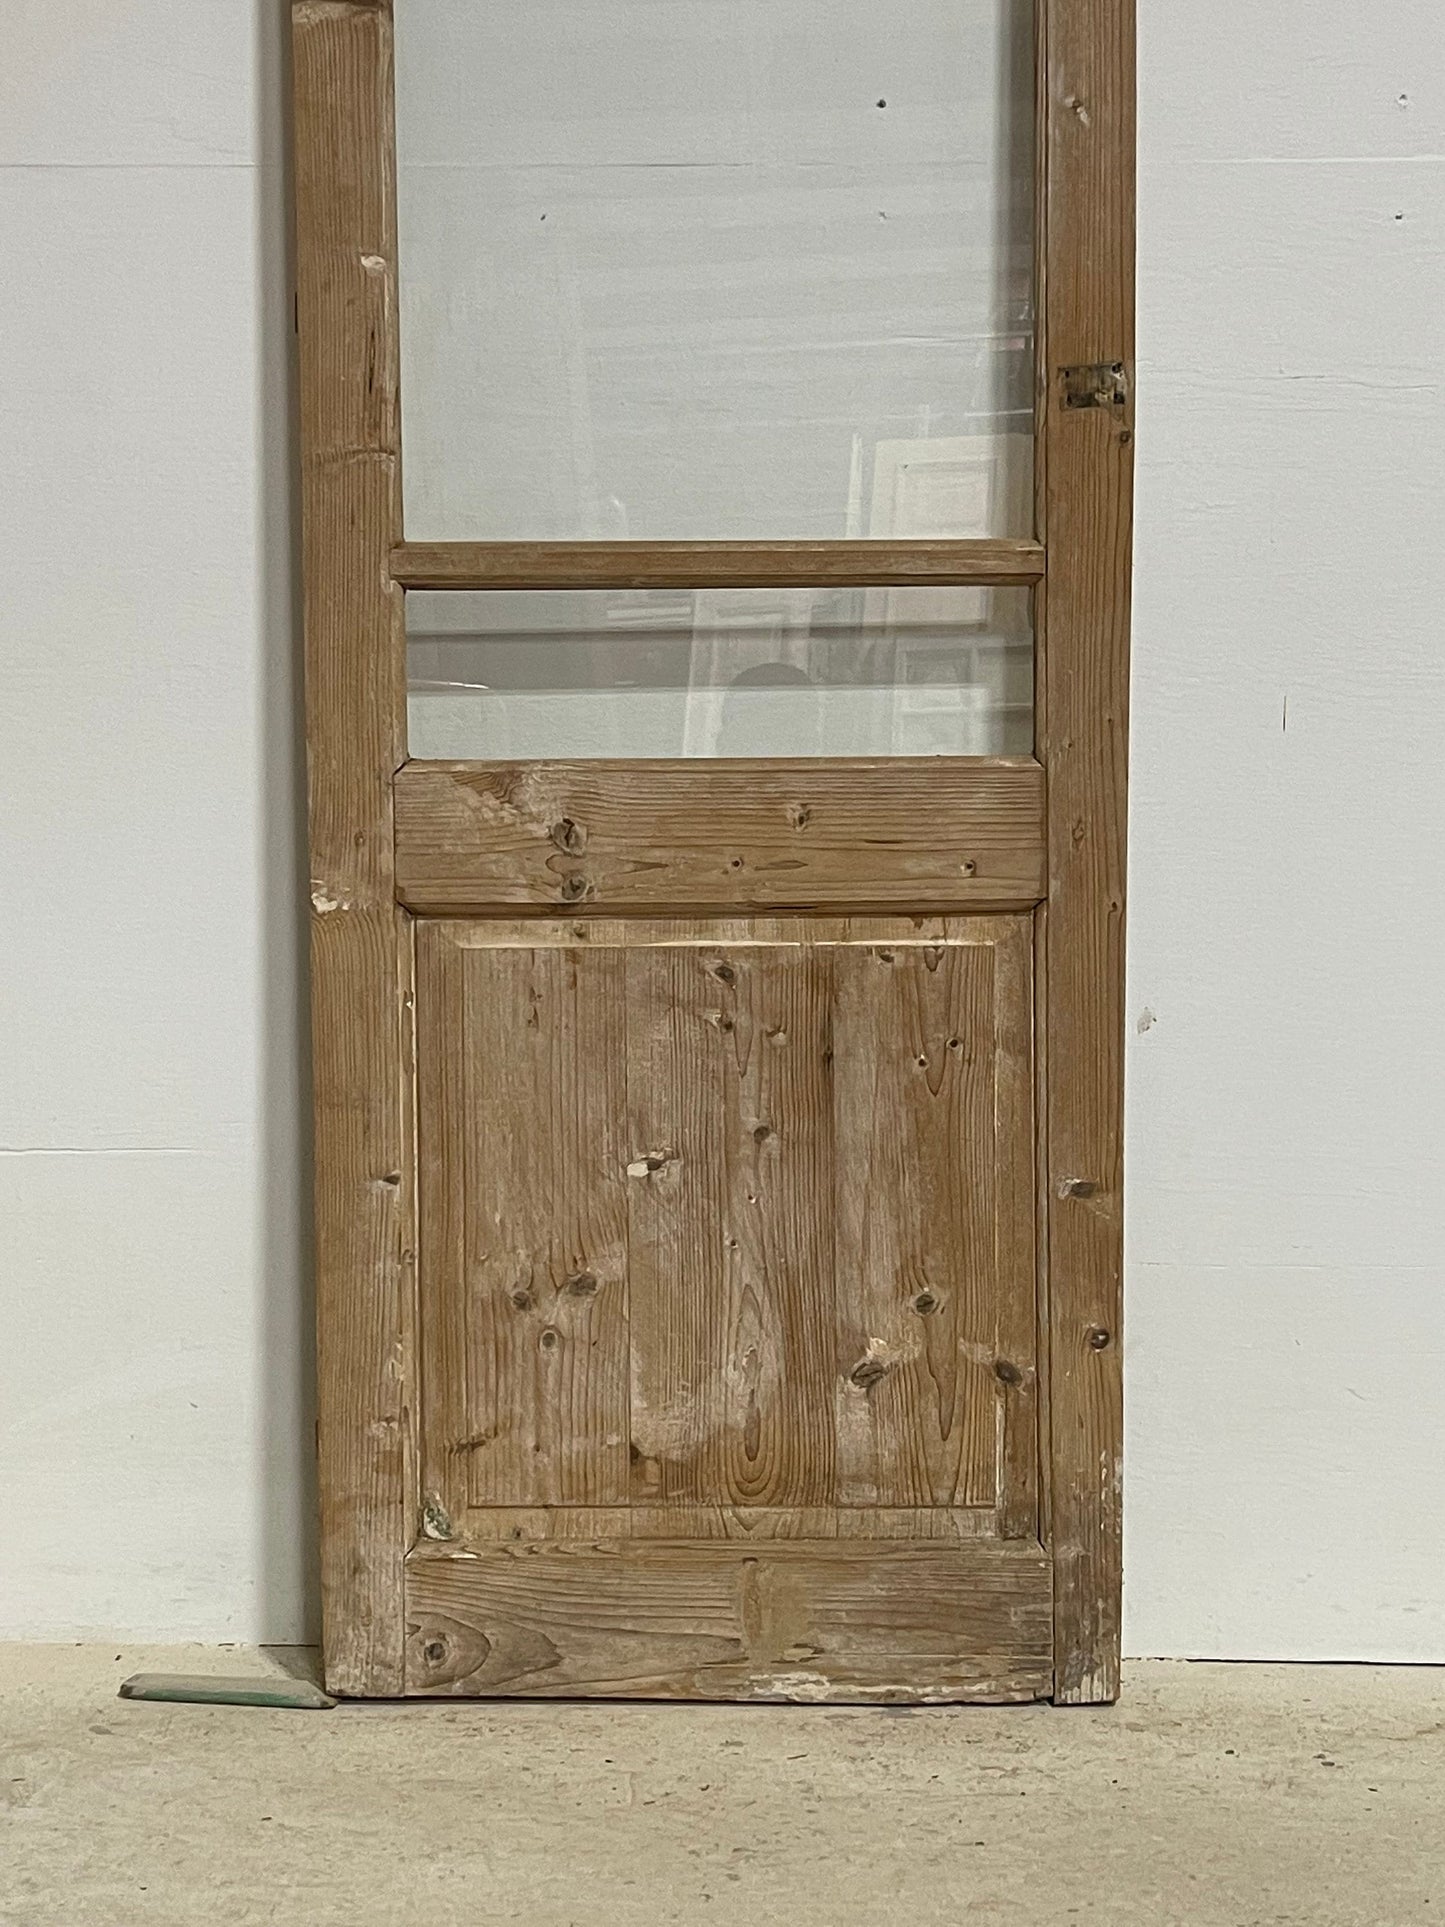 Antique French panel door with glass (84.5x25.5) G1412s